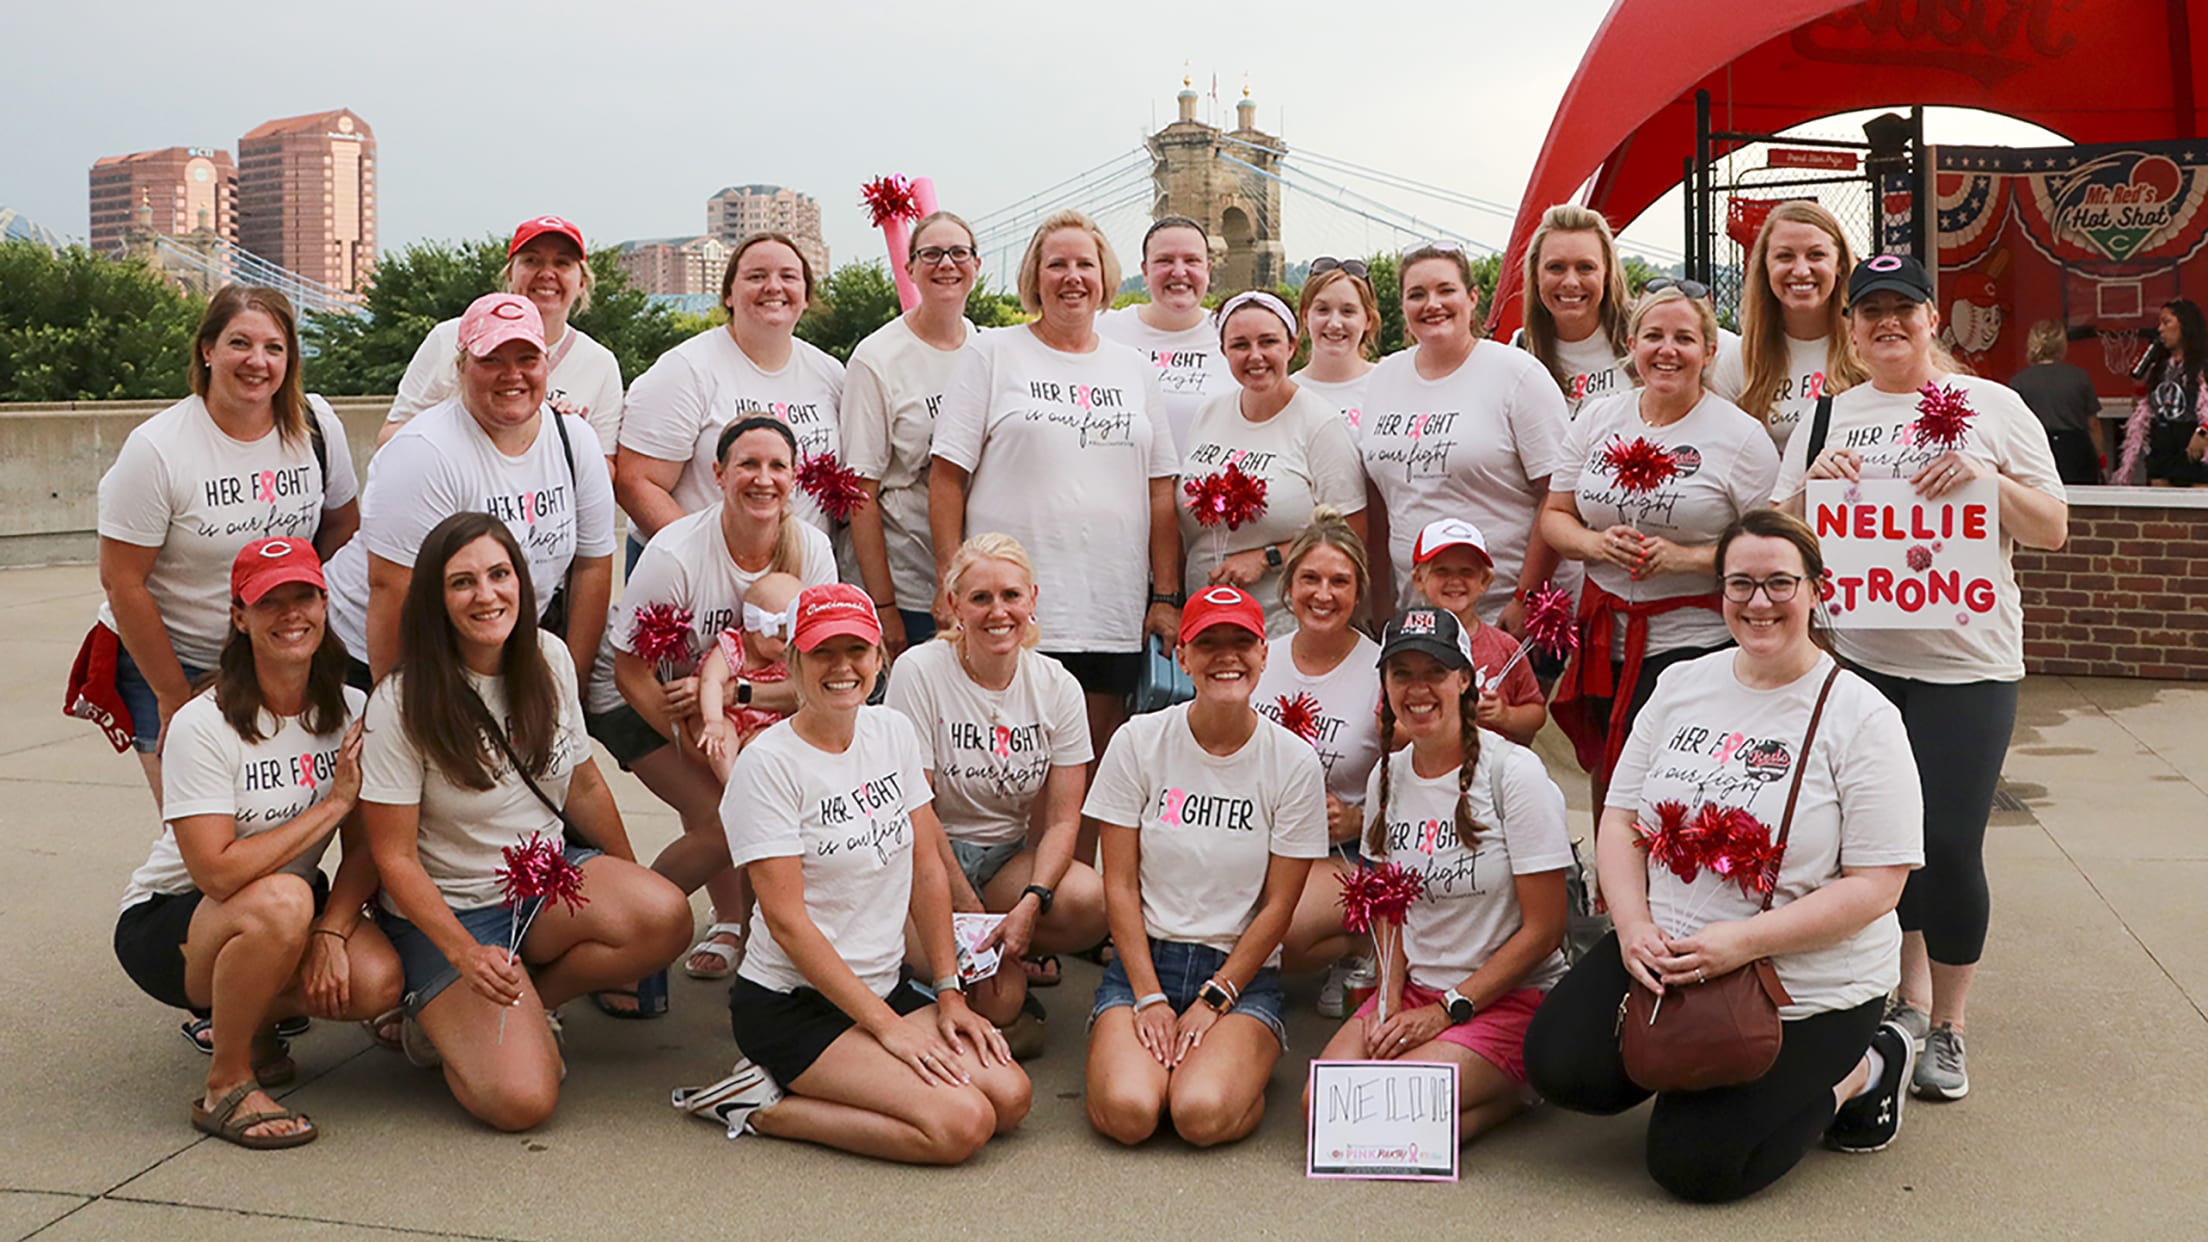 Cincinnati Reds - The Pink Party, presented by St. Elizabeth Healthcare,  returns to GABP on Wednesday, June 22, and gives fans a chance to enjoy a  Reds game while raising awareness for